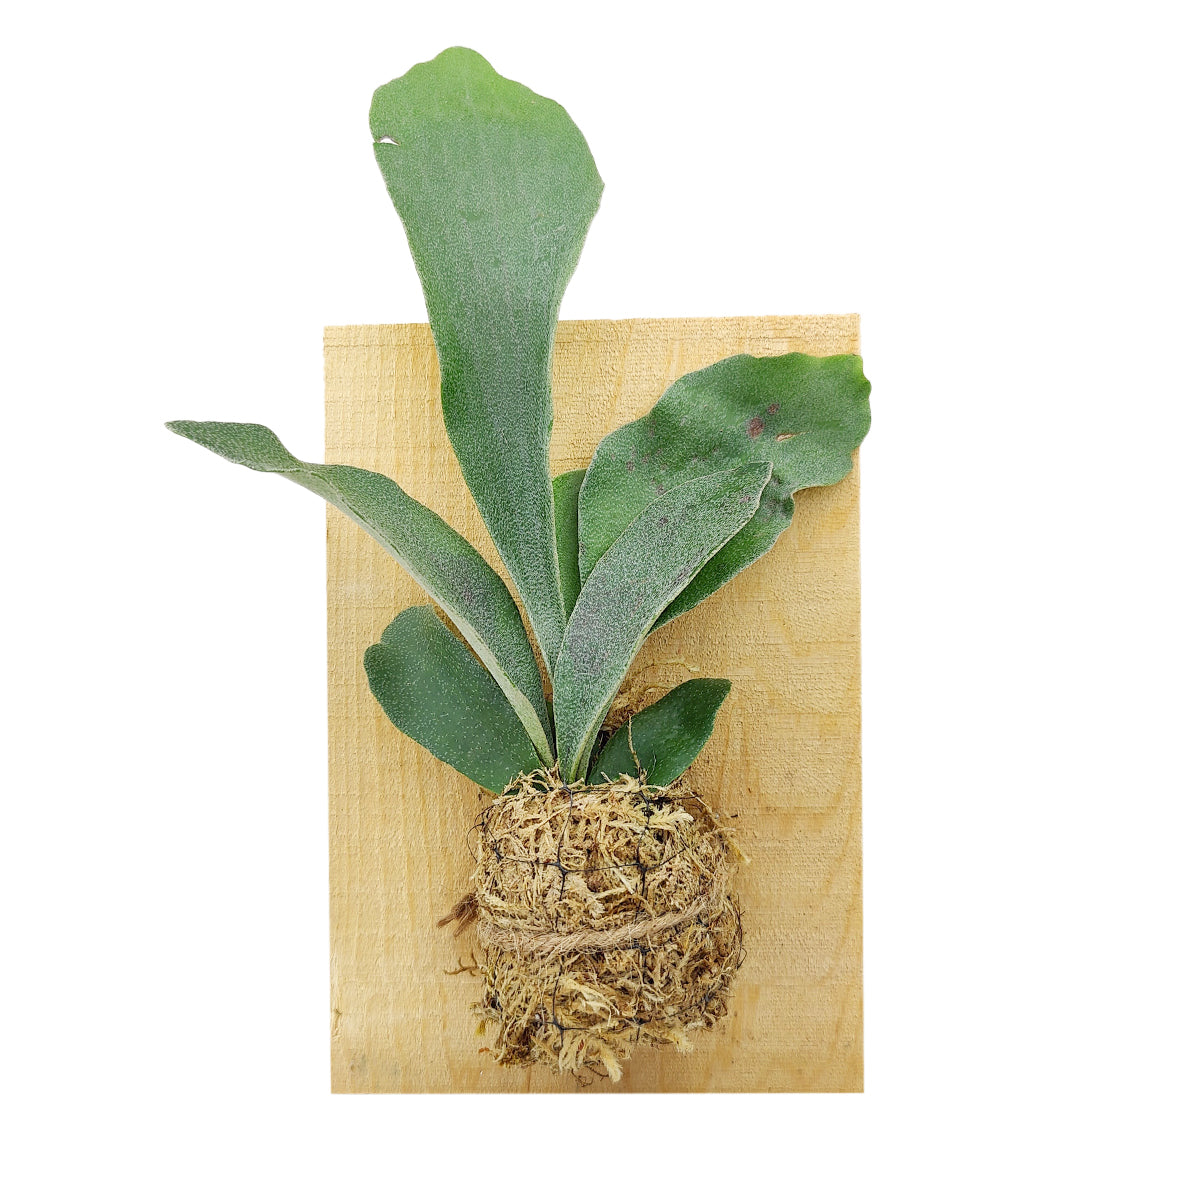  Staghorn Fern On Wood Plank, Succulent Birthday Gift, Succulent Home Decor Ideas